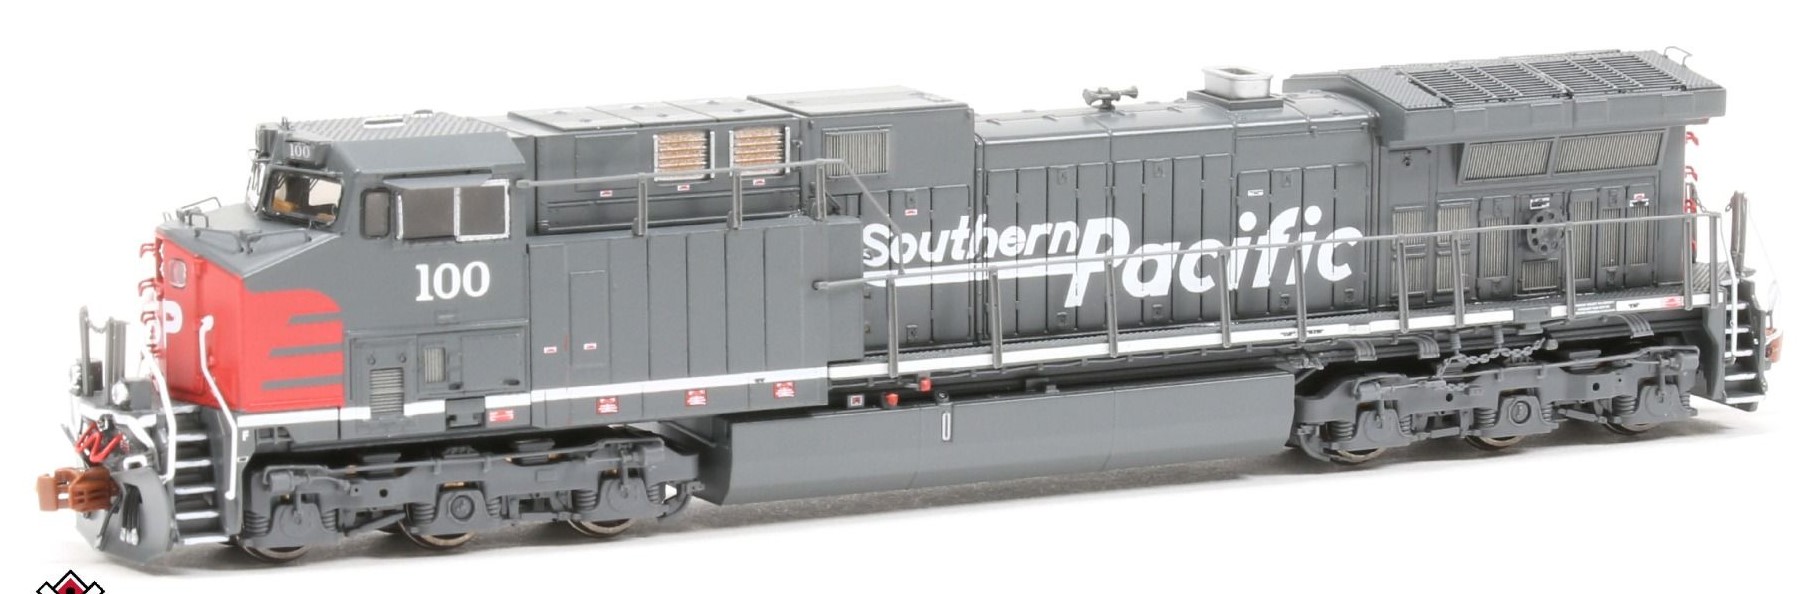 ScaleTrains Rivet Counter N SXT39127 DCC/ESU LokSound V5 Equipped GE AC4400CW Locomotive Southern Pacific 'Speed Lettering' Scheme SP #100